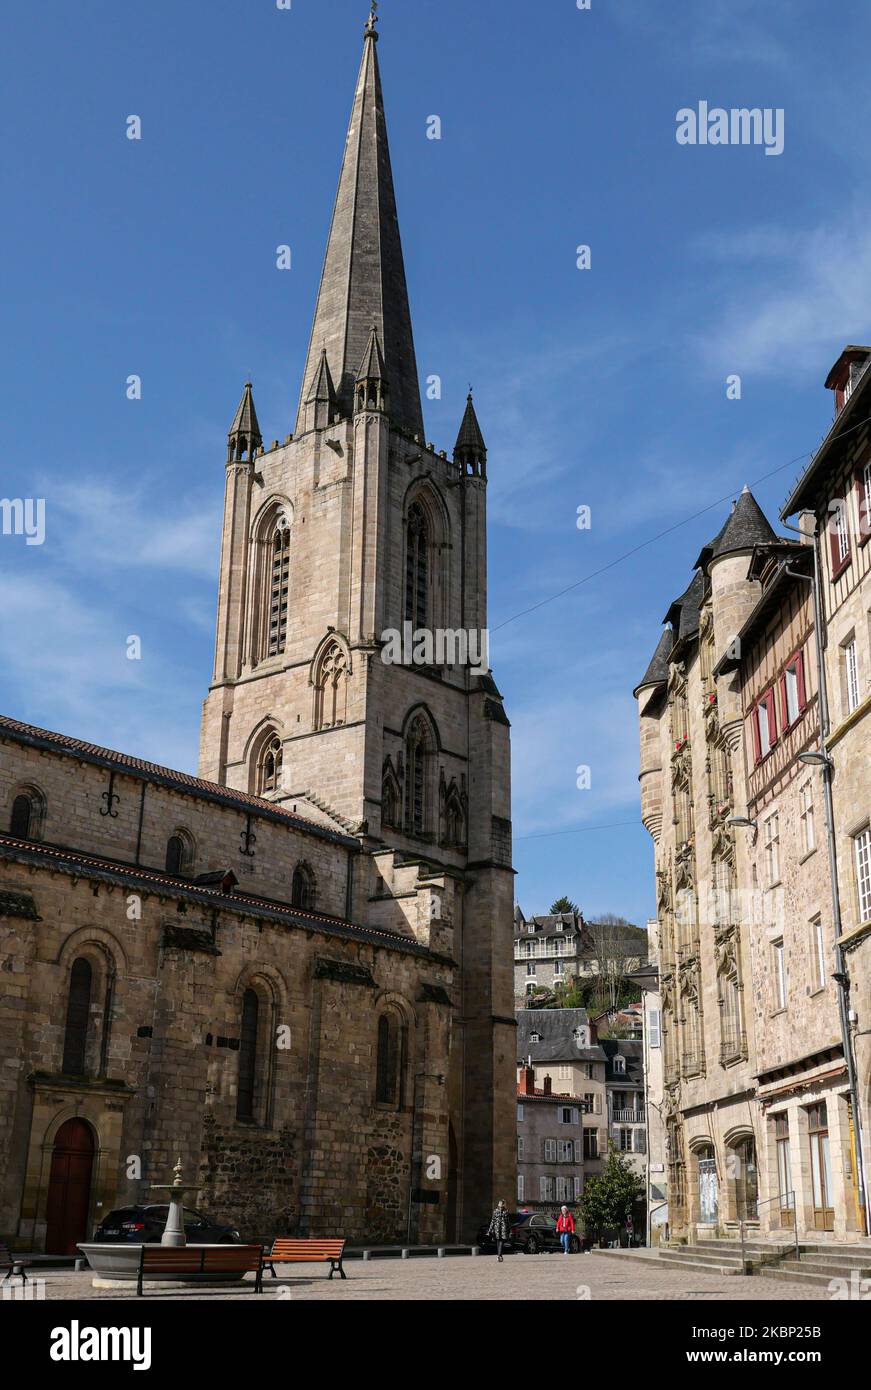 Tulle, central southern France: view of the steeple of Notre Dame Cathedral and “La Maison de Loyac”, both listed Historical Monuments, downtown on “p Stock Photo